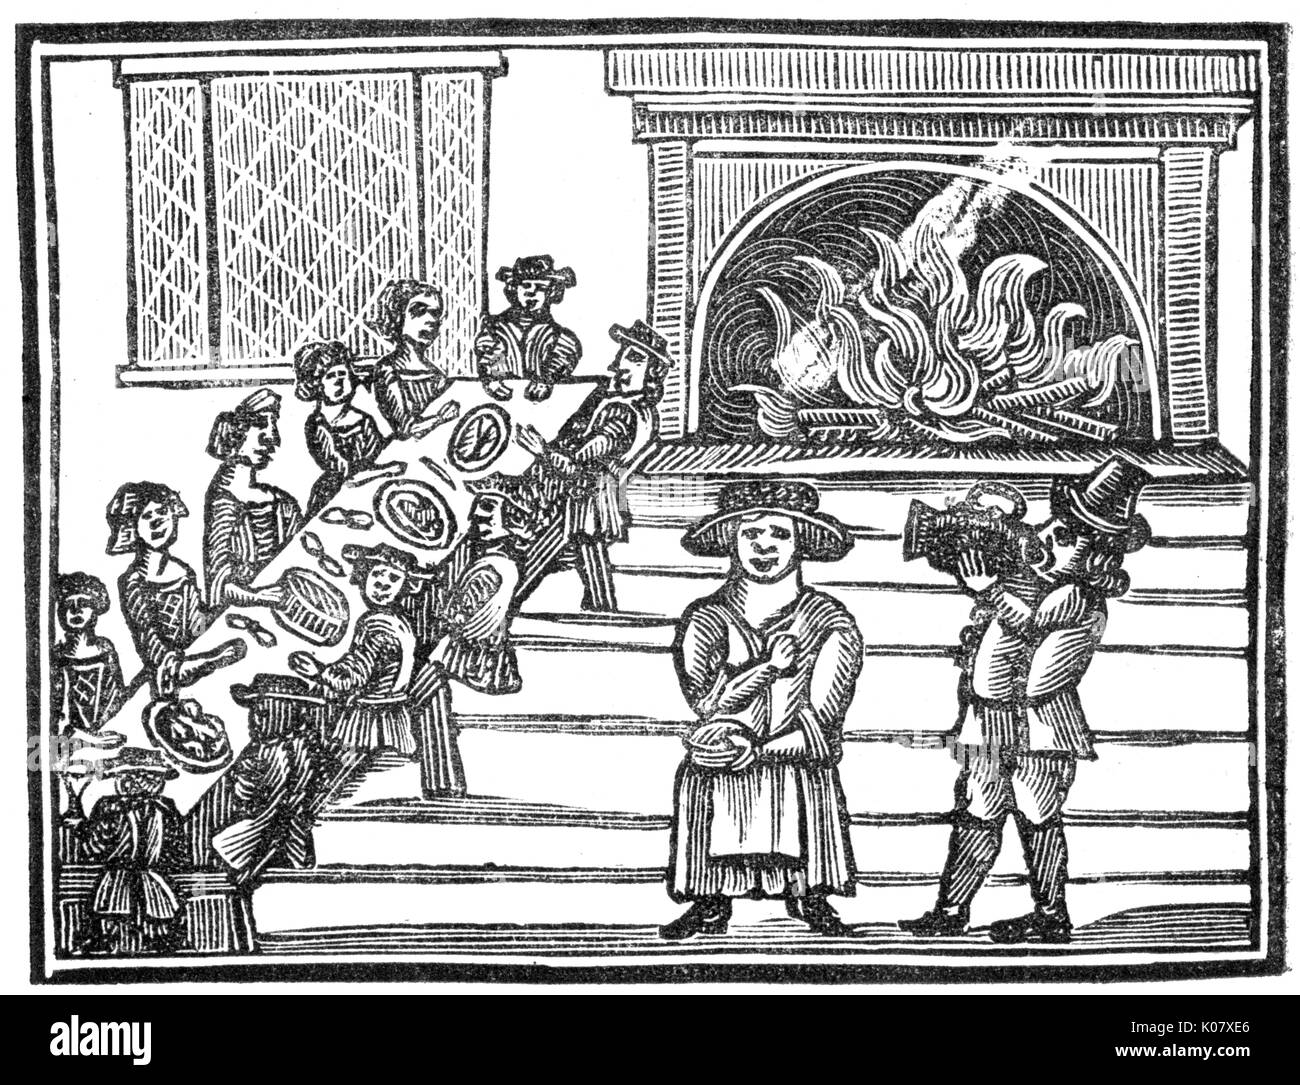 Feasting, c.1600. A party of people sit at a long table in a room with a roaring log fire and eat and drink their fill.     Date: C.1600 Stock Photo